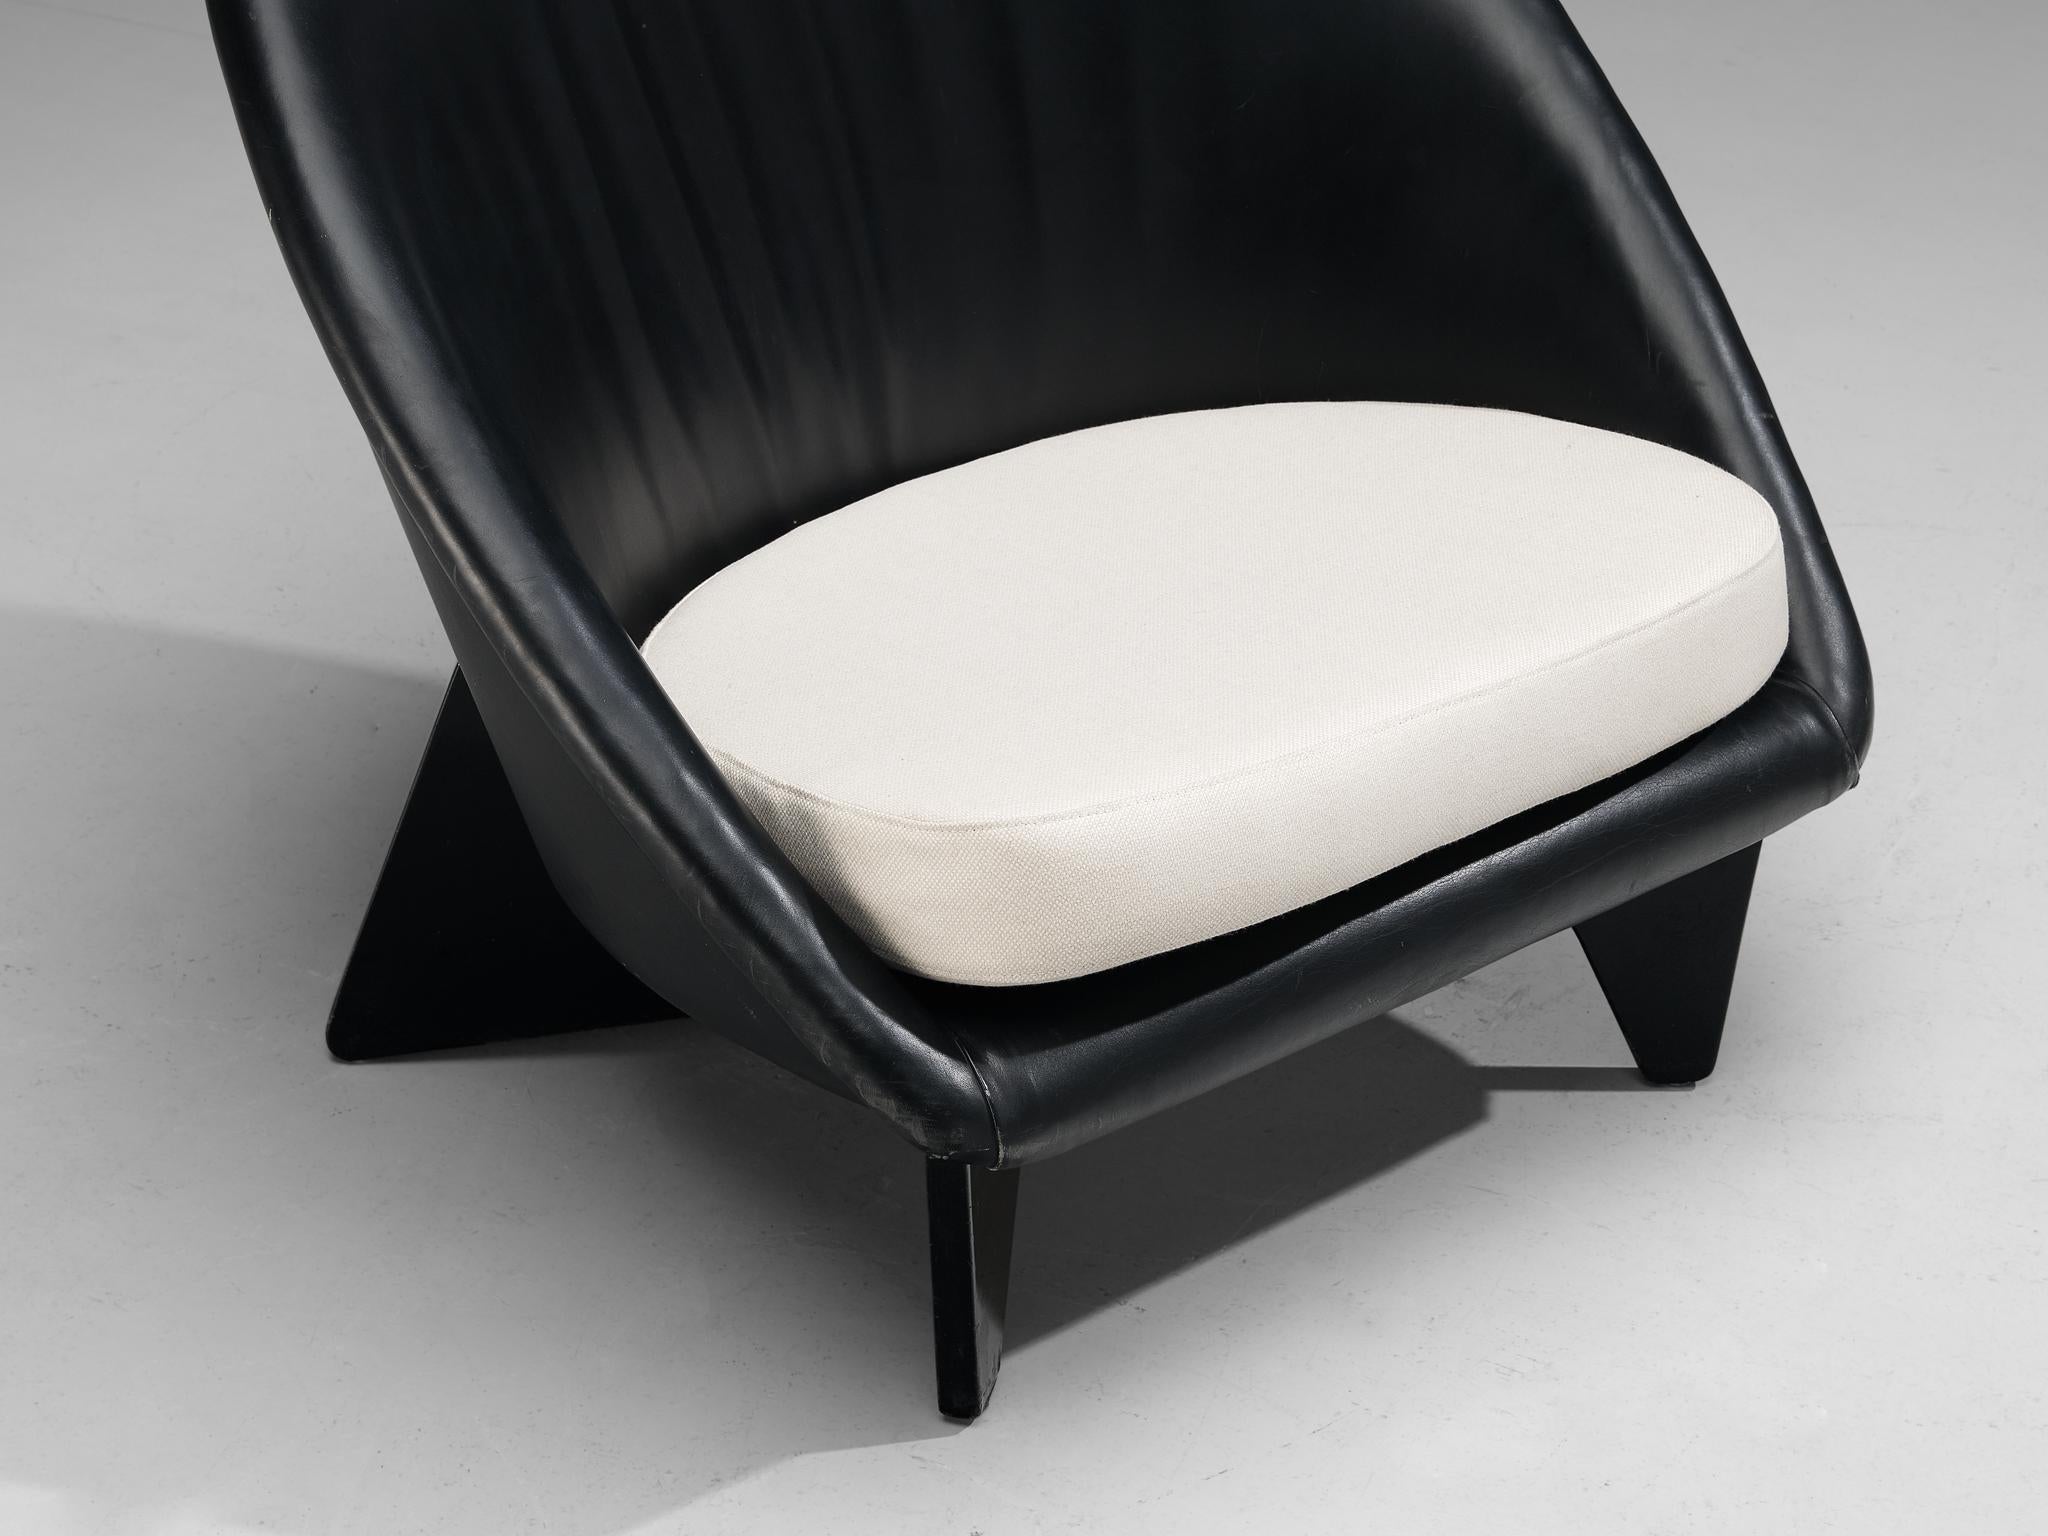 Fabric Rare Antti Nurmesniemi for Palace Hotel Lounge Chair in Black Upholstery For Sale